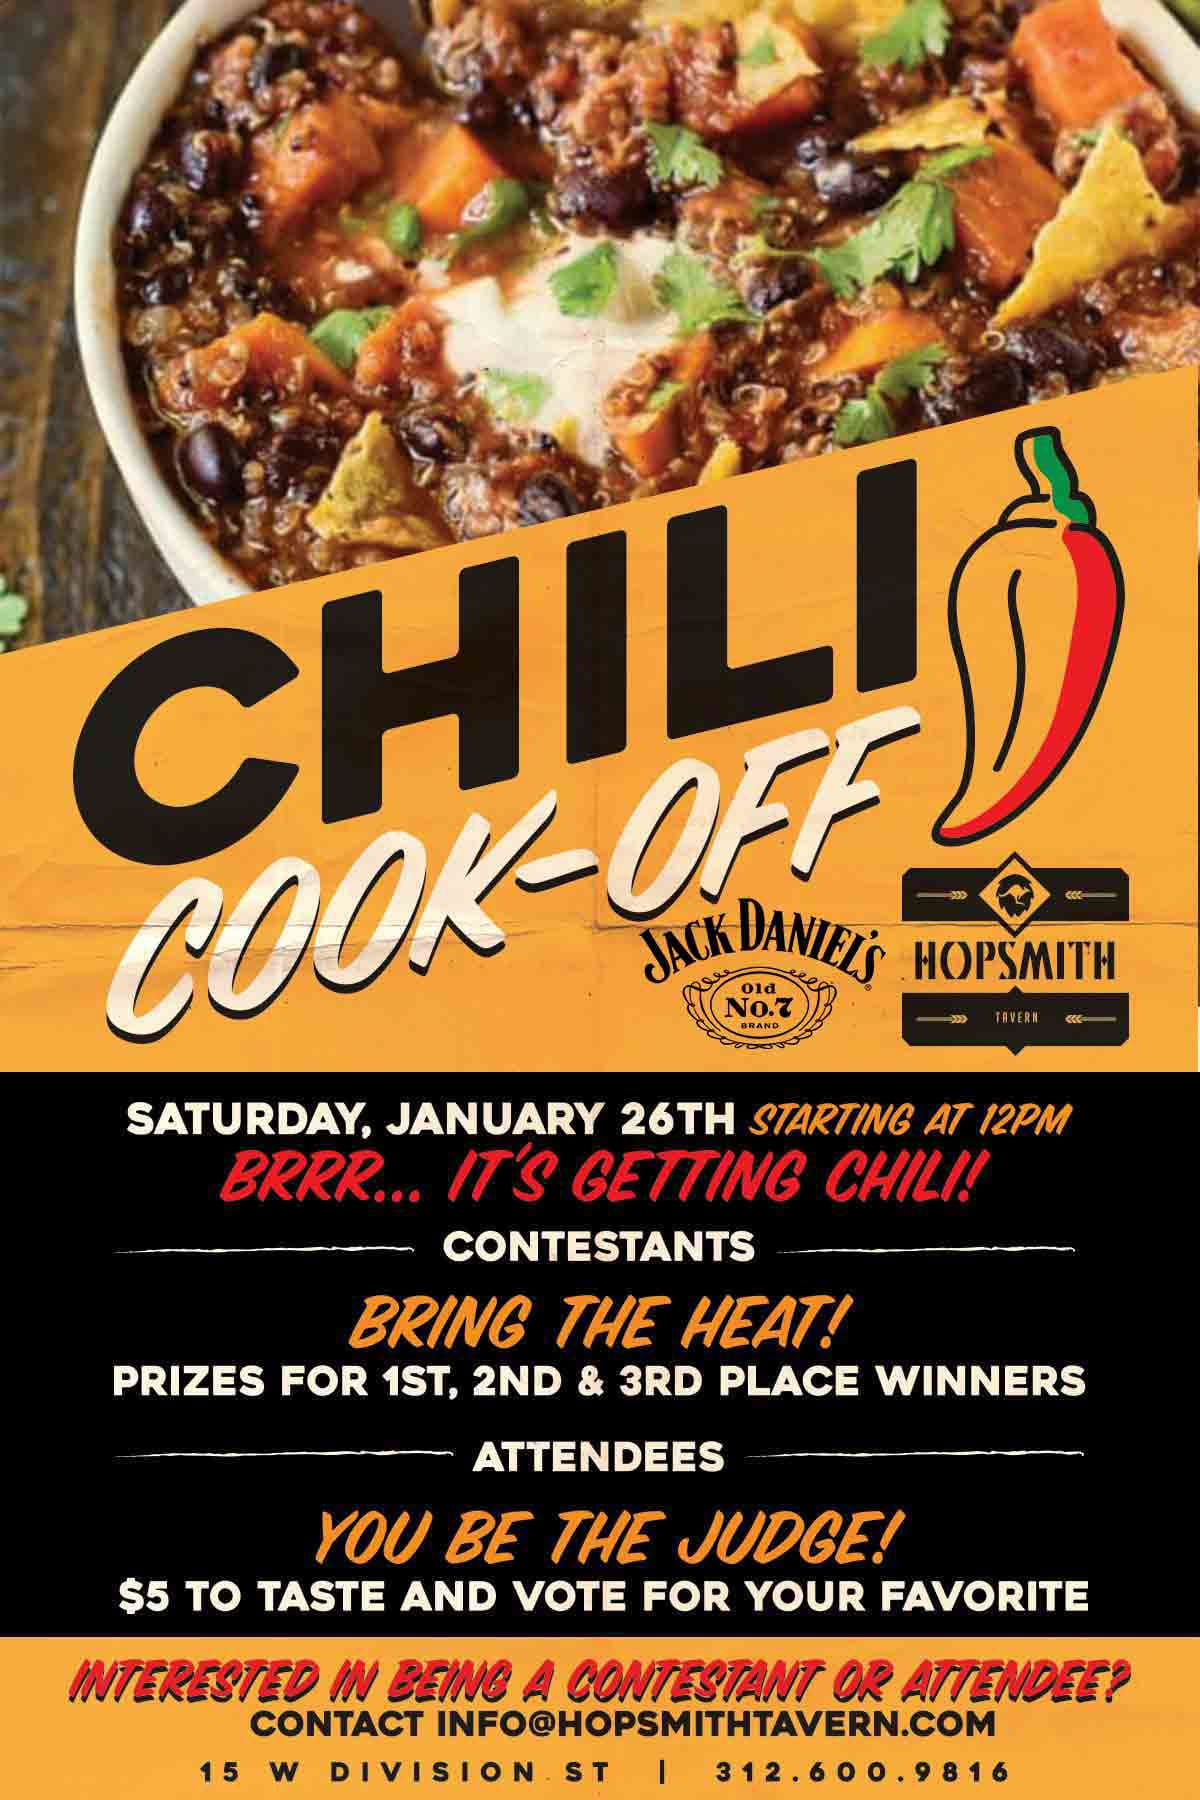 2018 Hopsmith Chili Cook-off